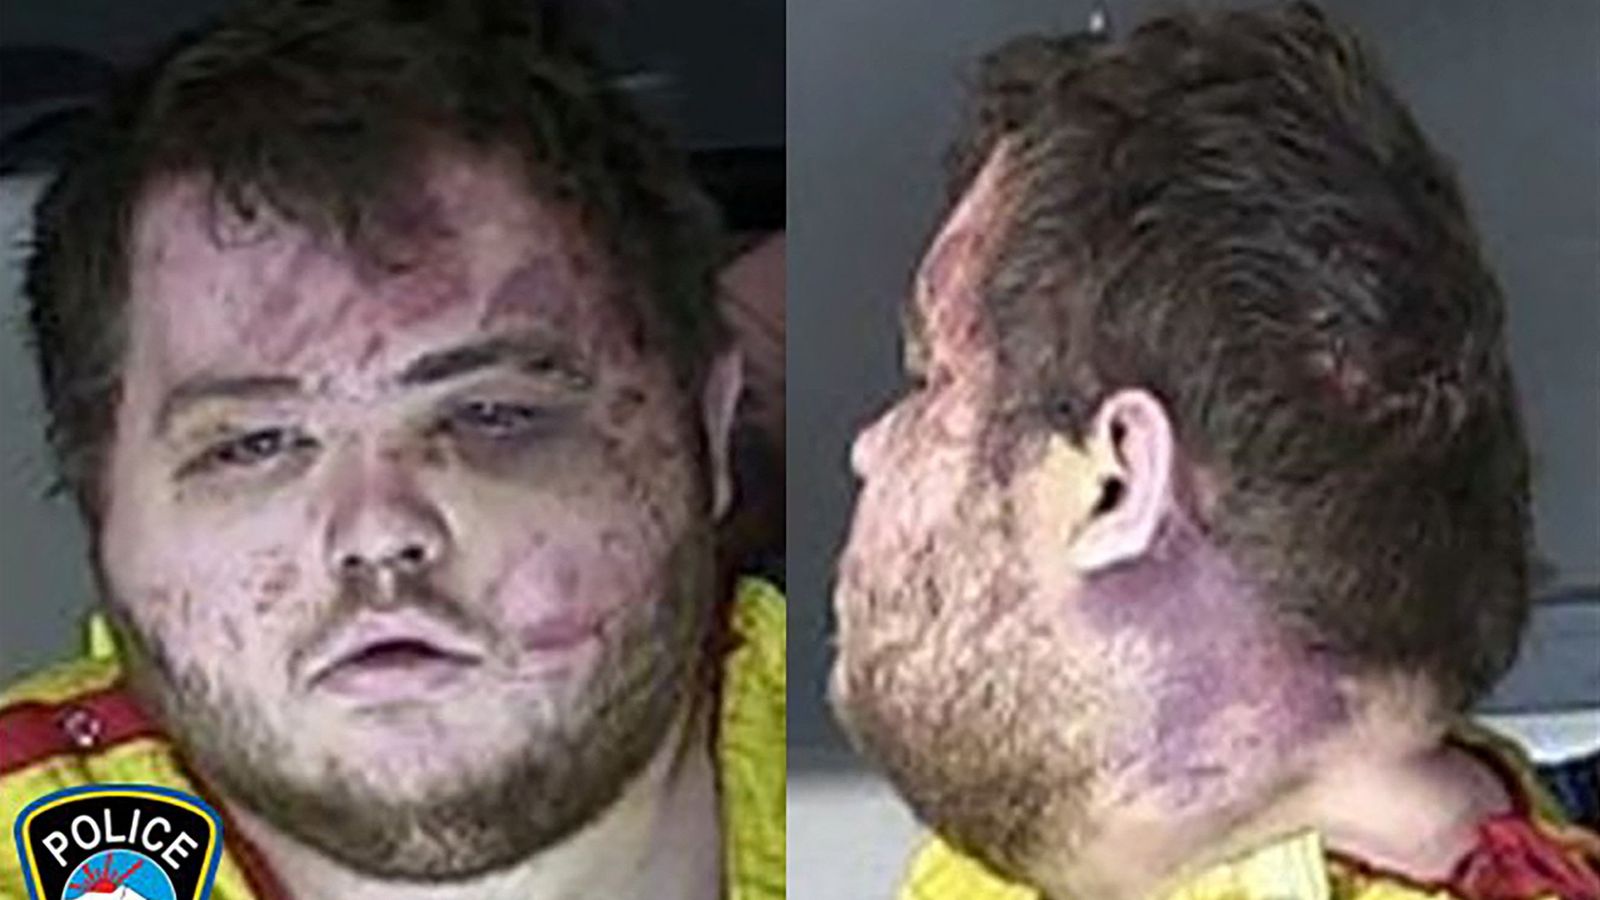 Mugshot of Colorado gay club shooting suspect shows injuries sustained during confrontation with 'heroic people'